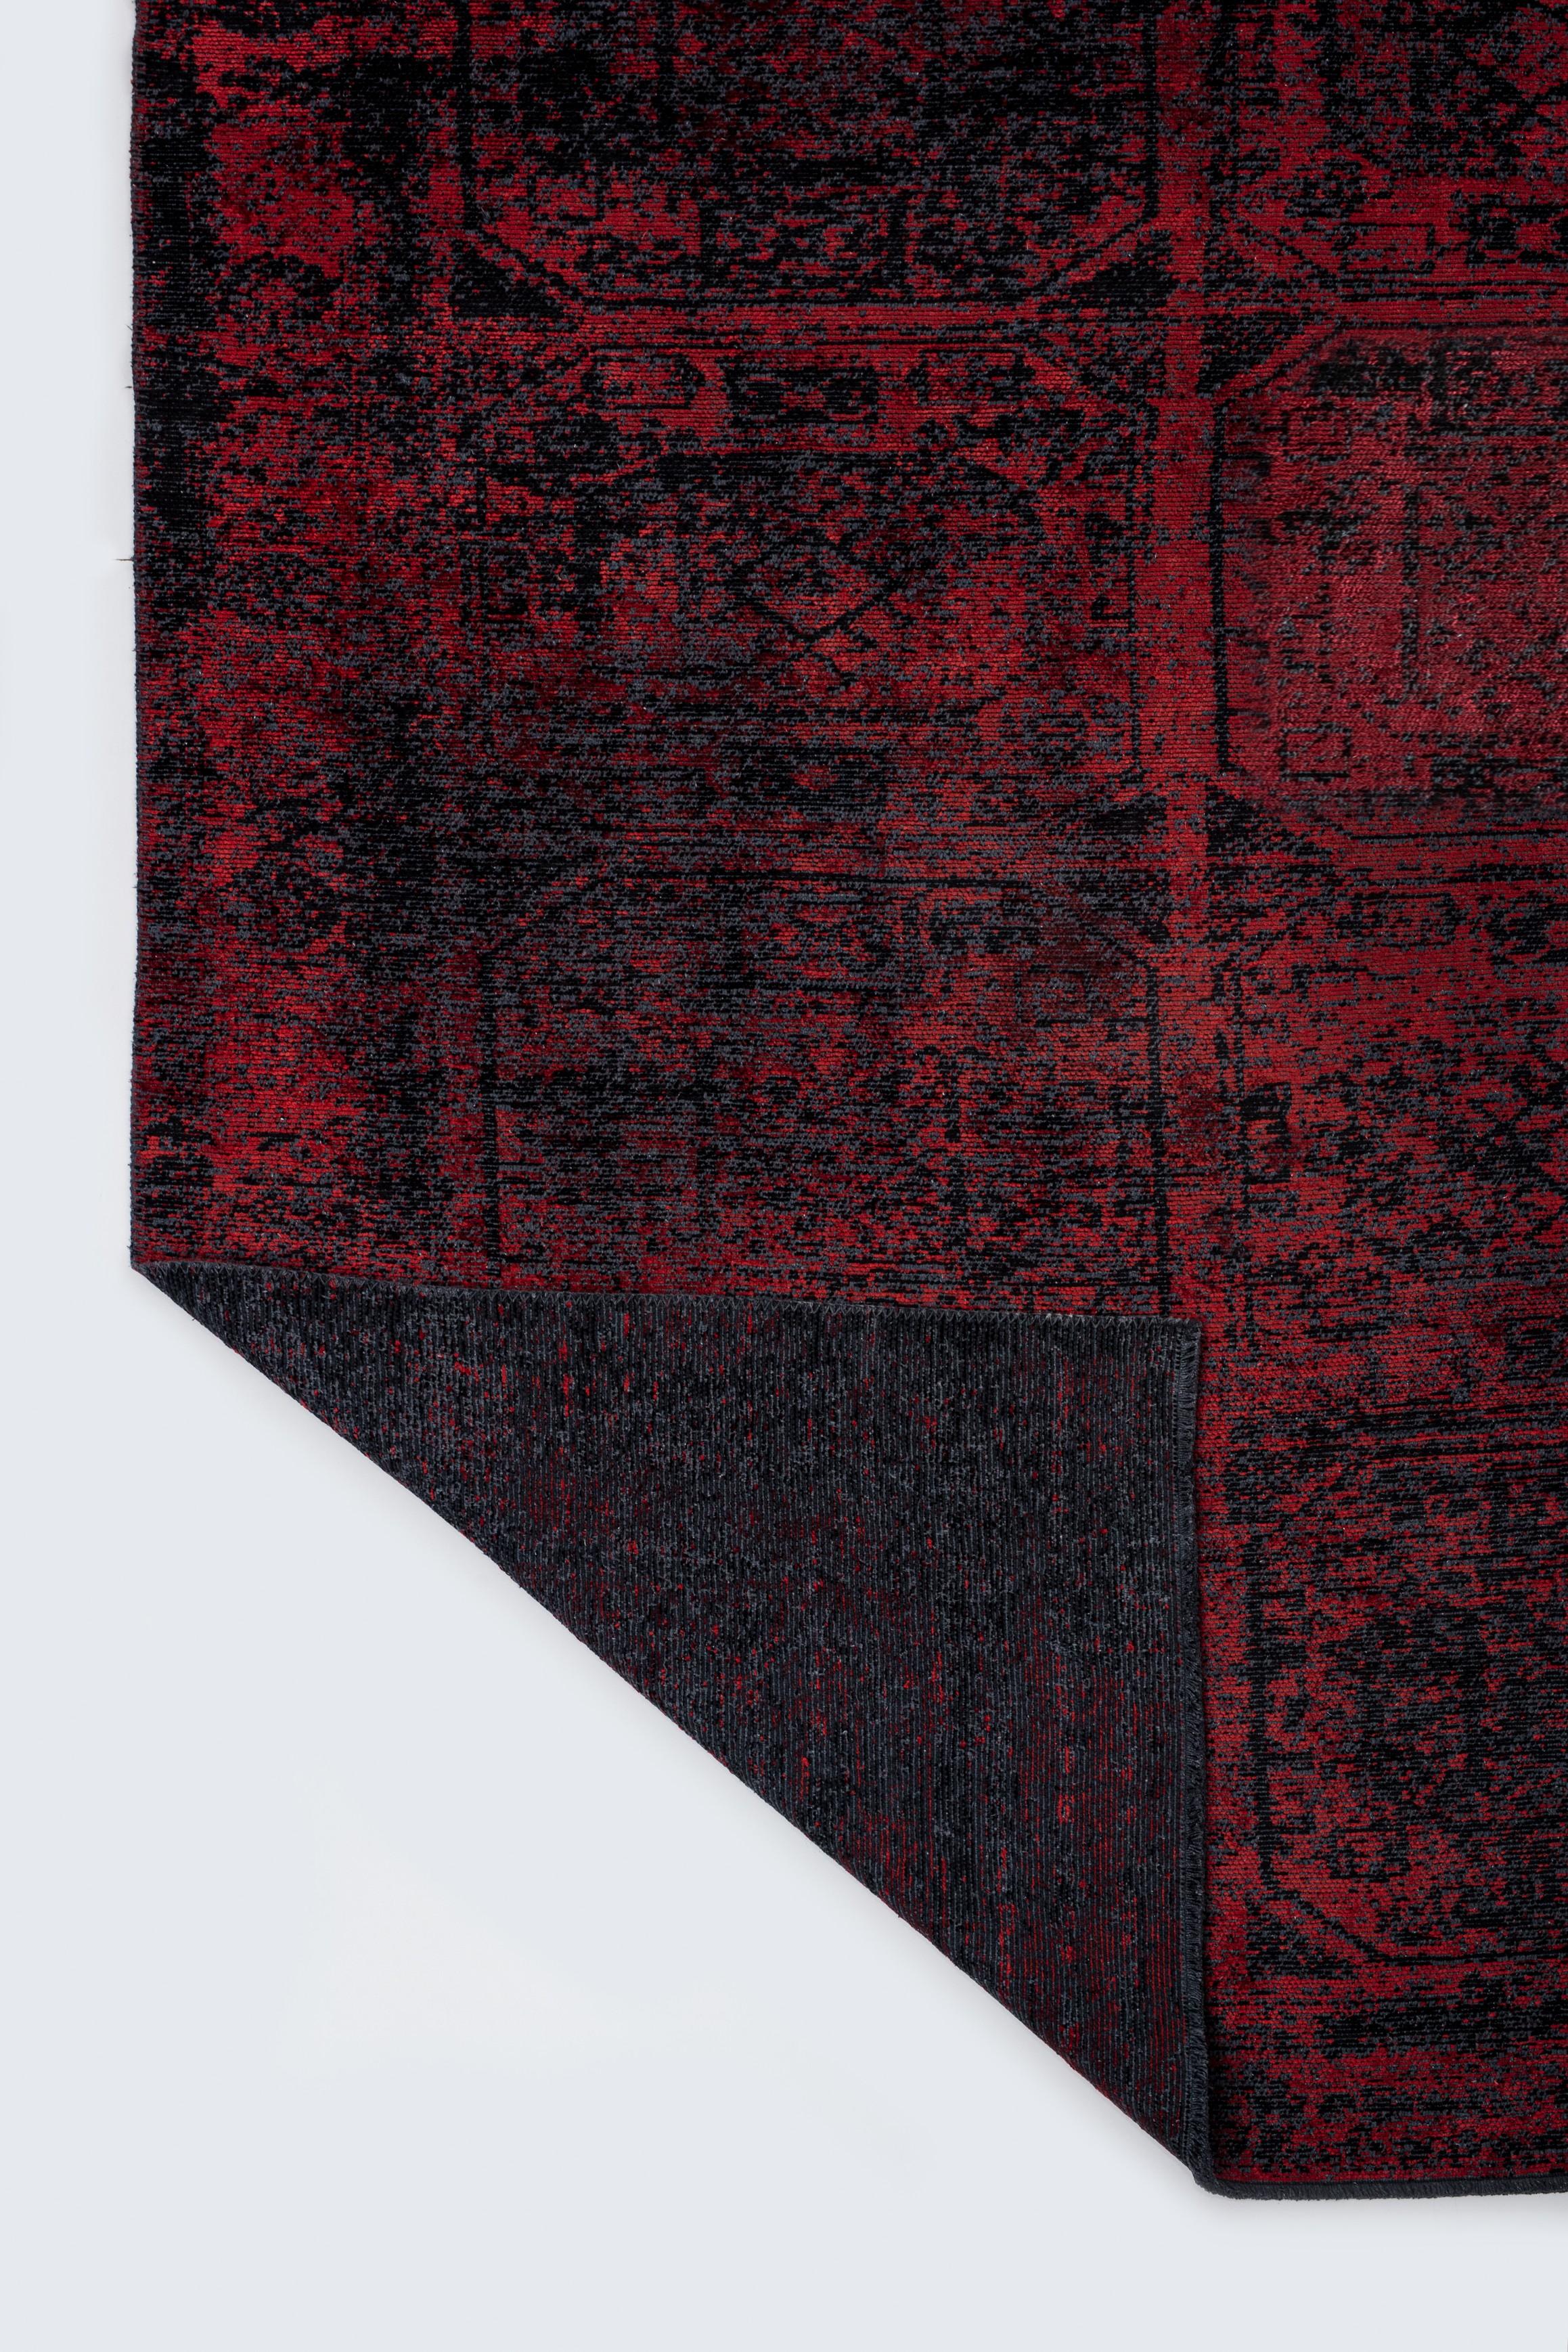 For Sale:  (Red) Modern  Oriental Luxury Area Rug 3